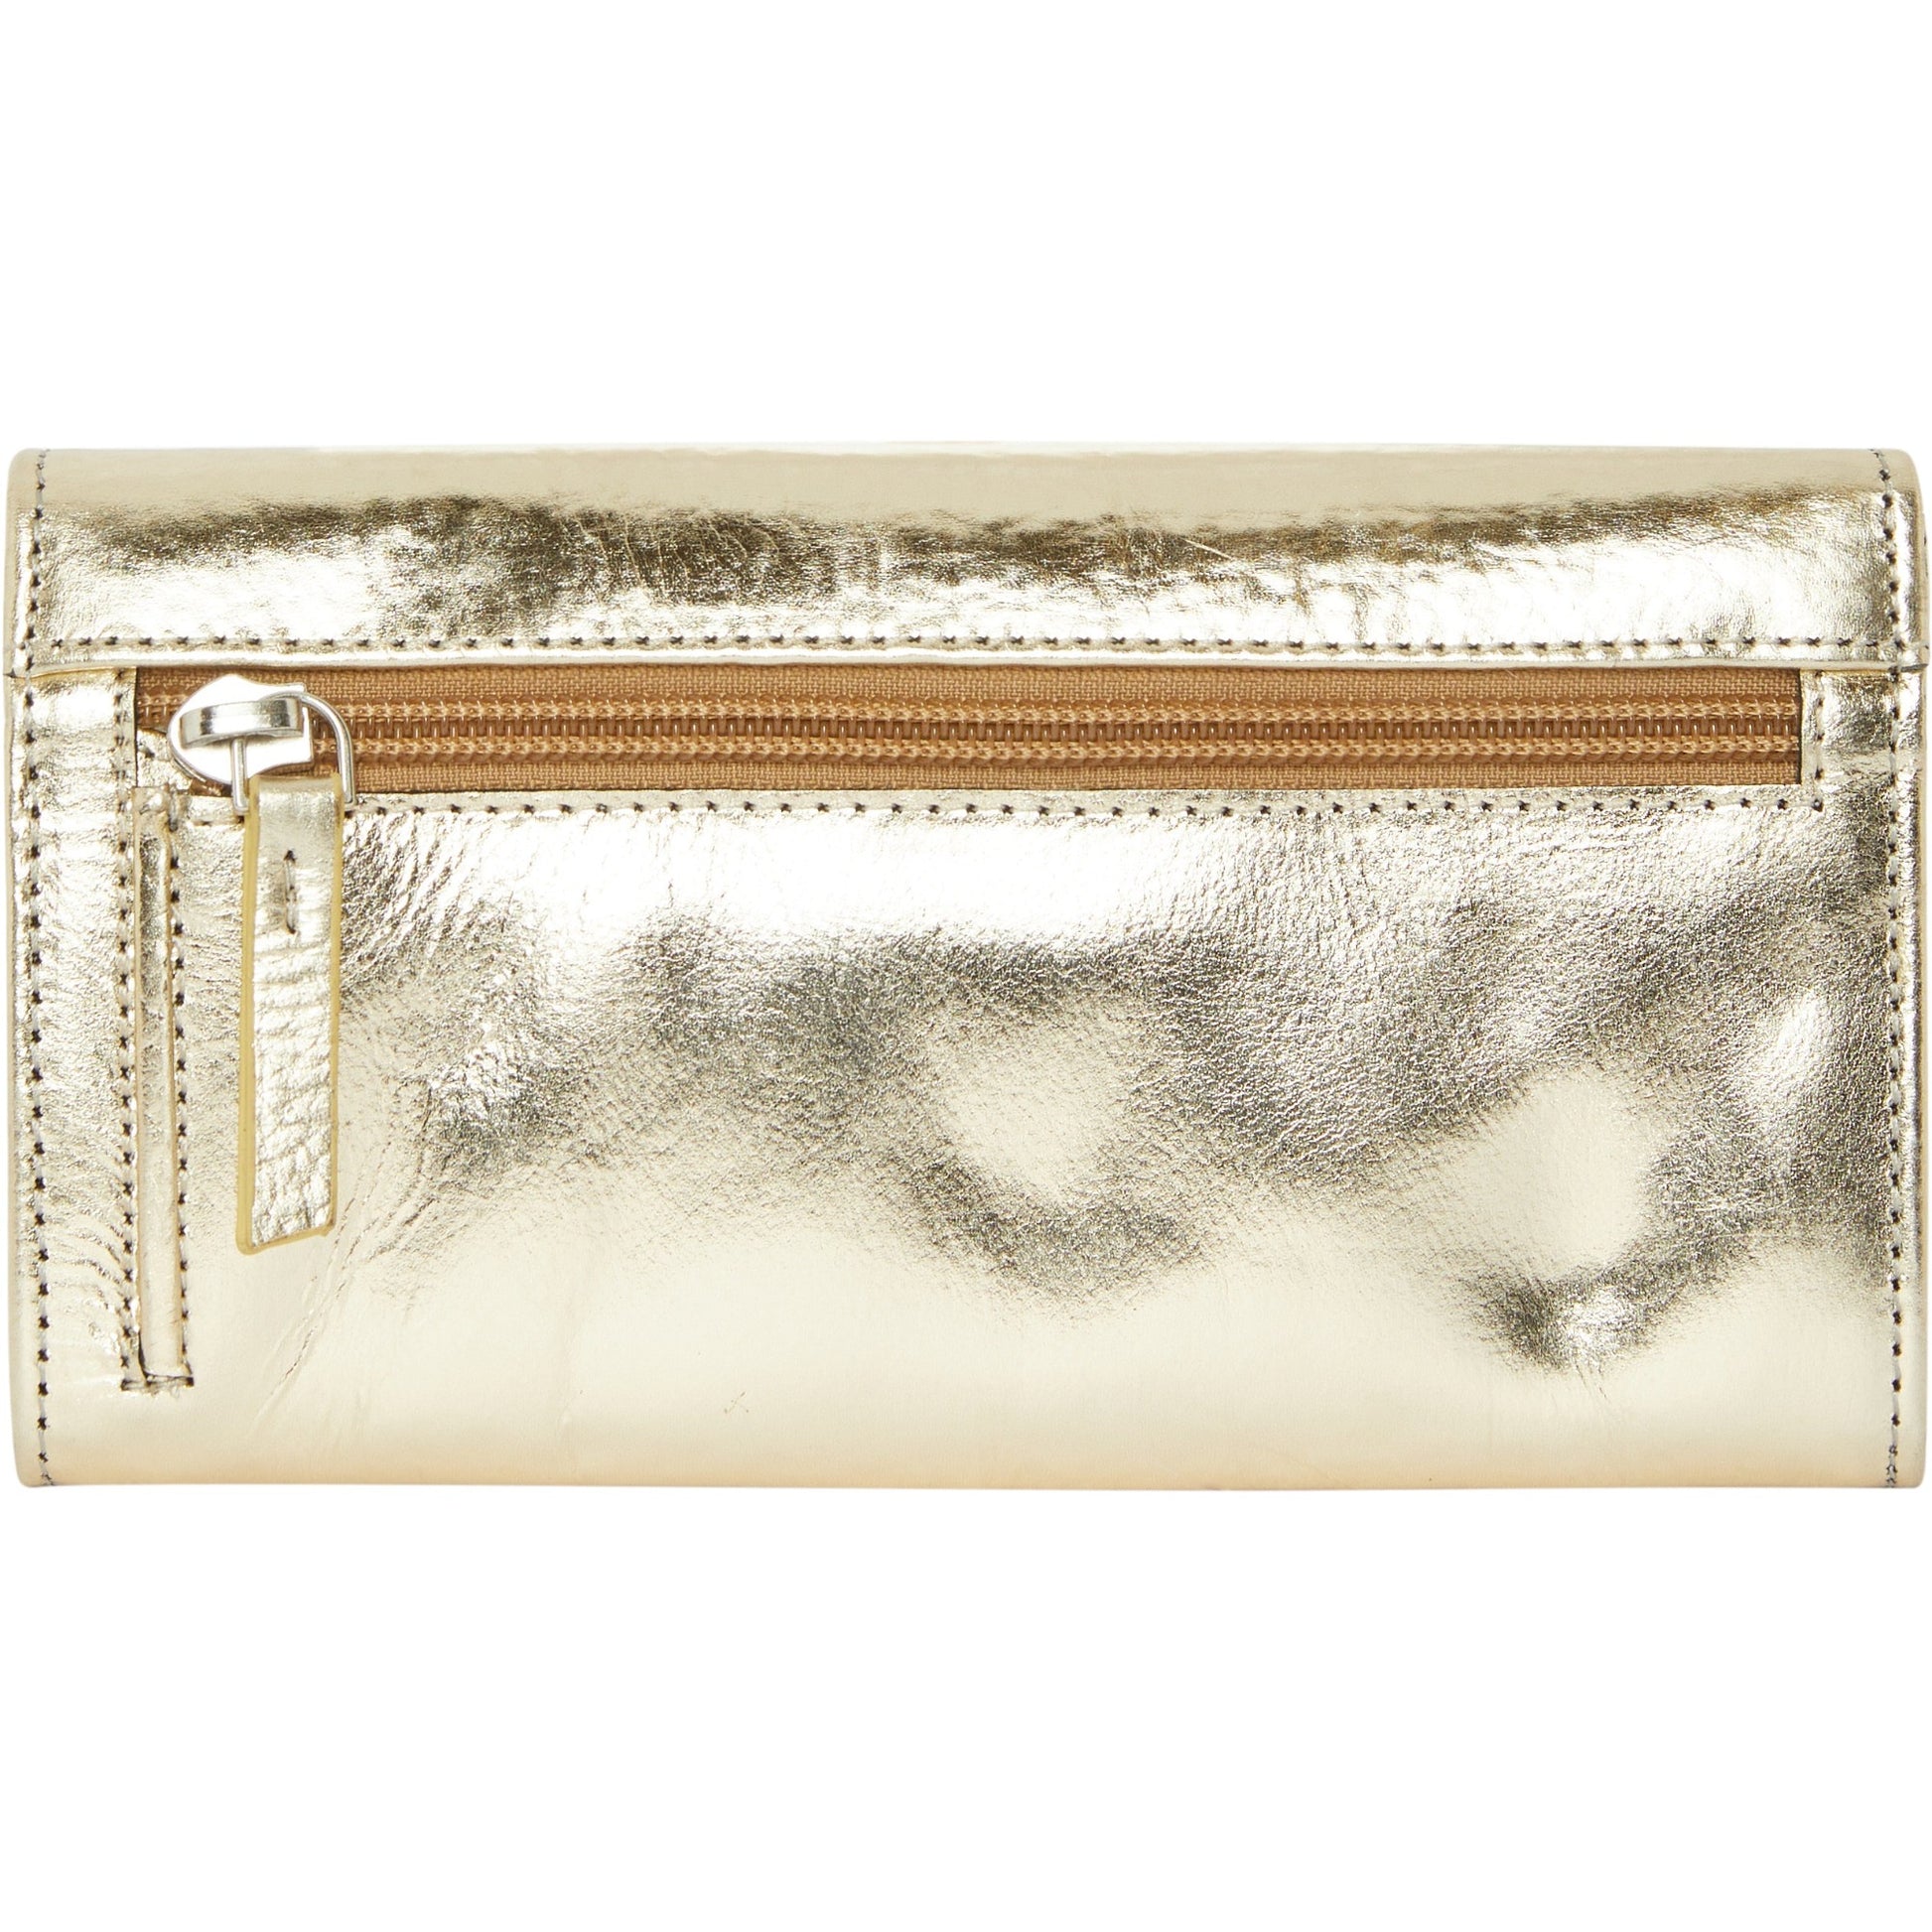 Gold Leather Multi Section Purse Brix and Bailey At sostter